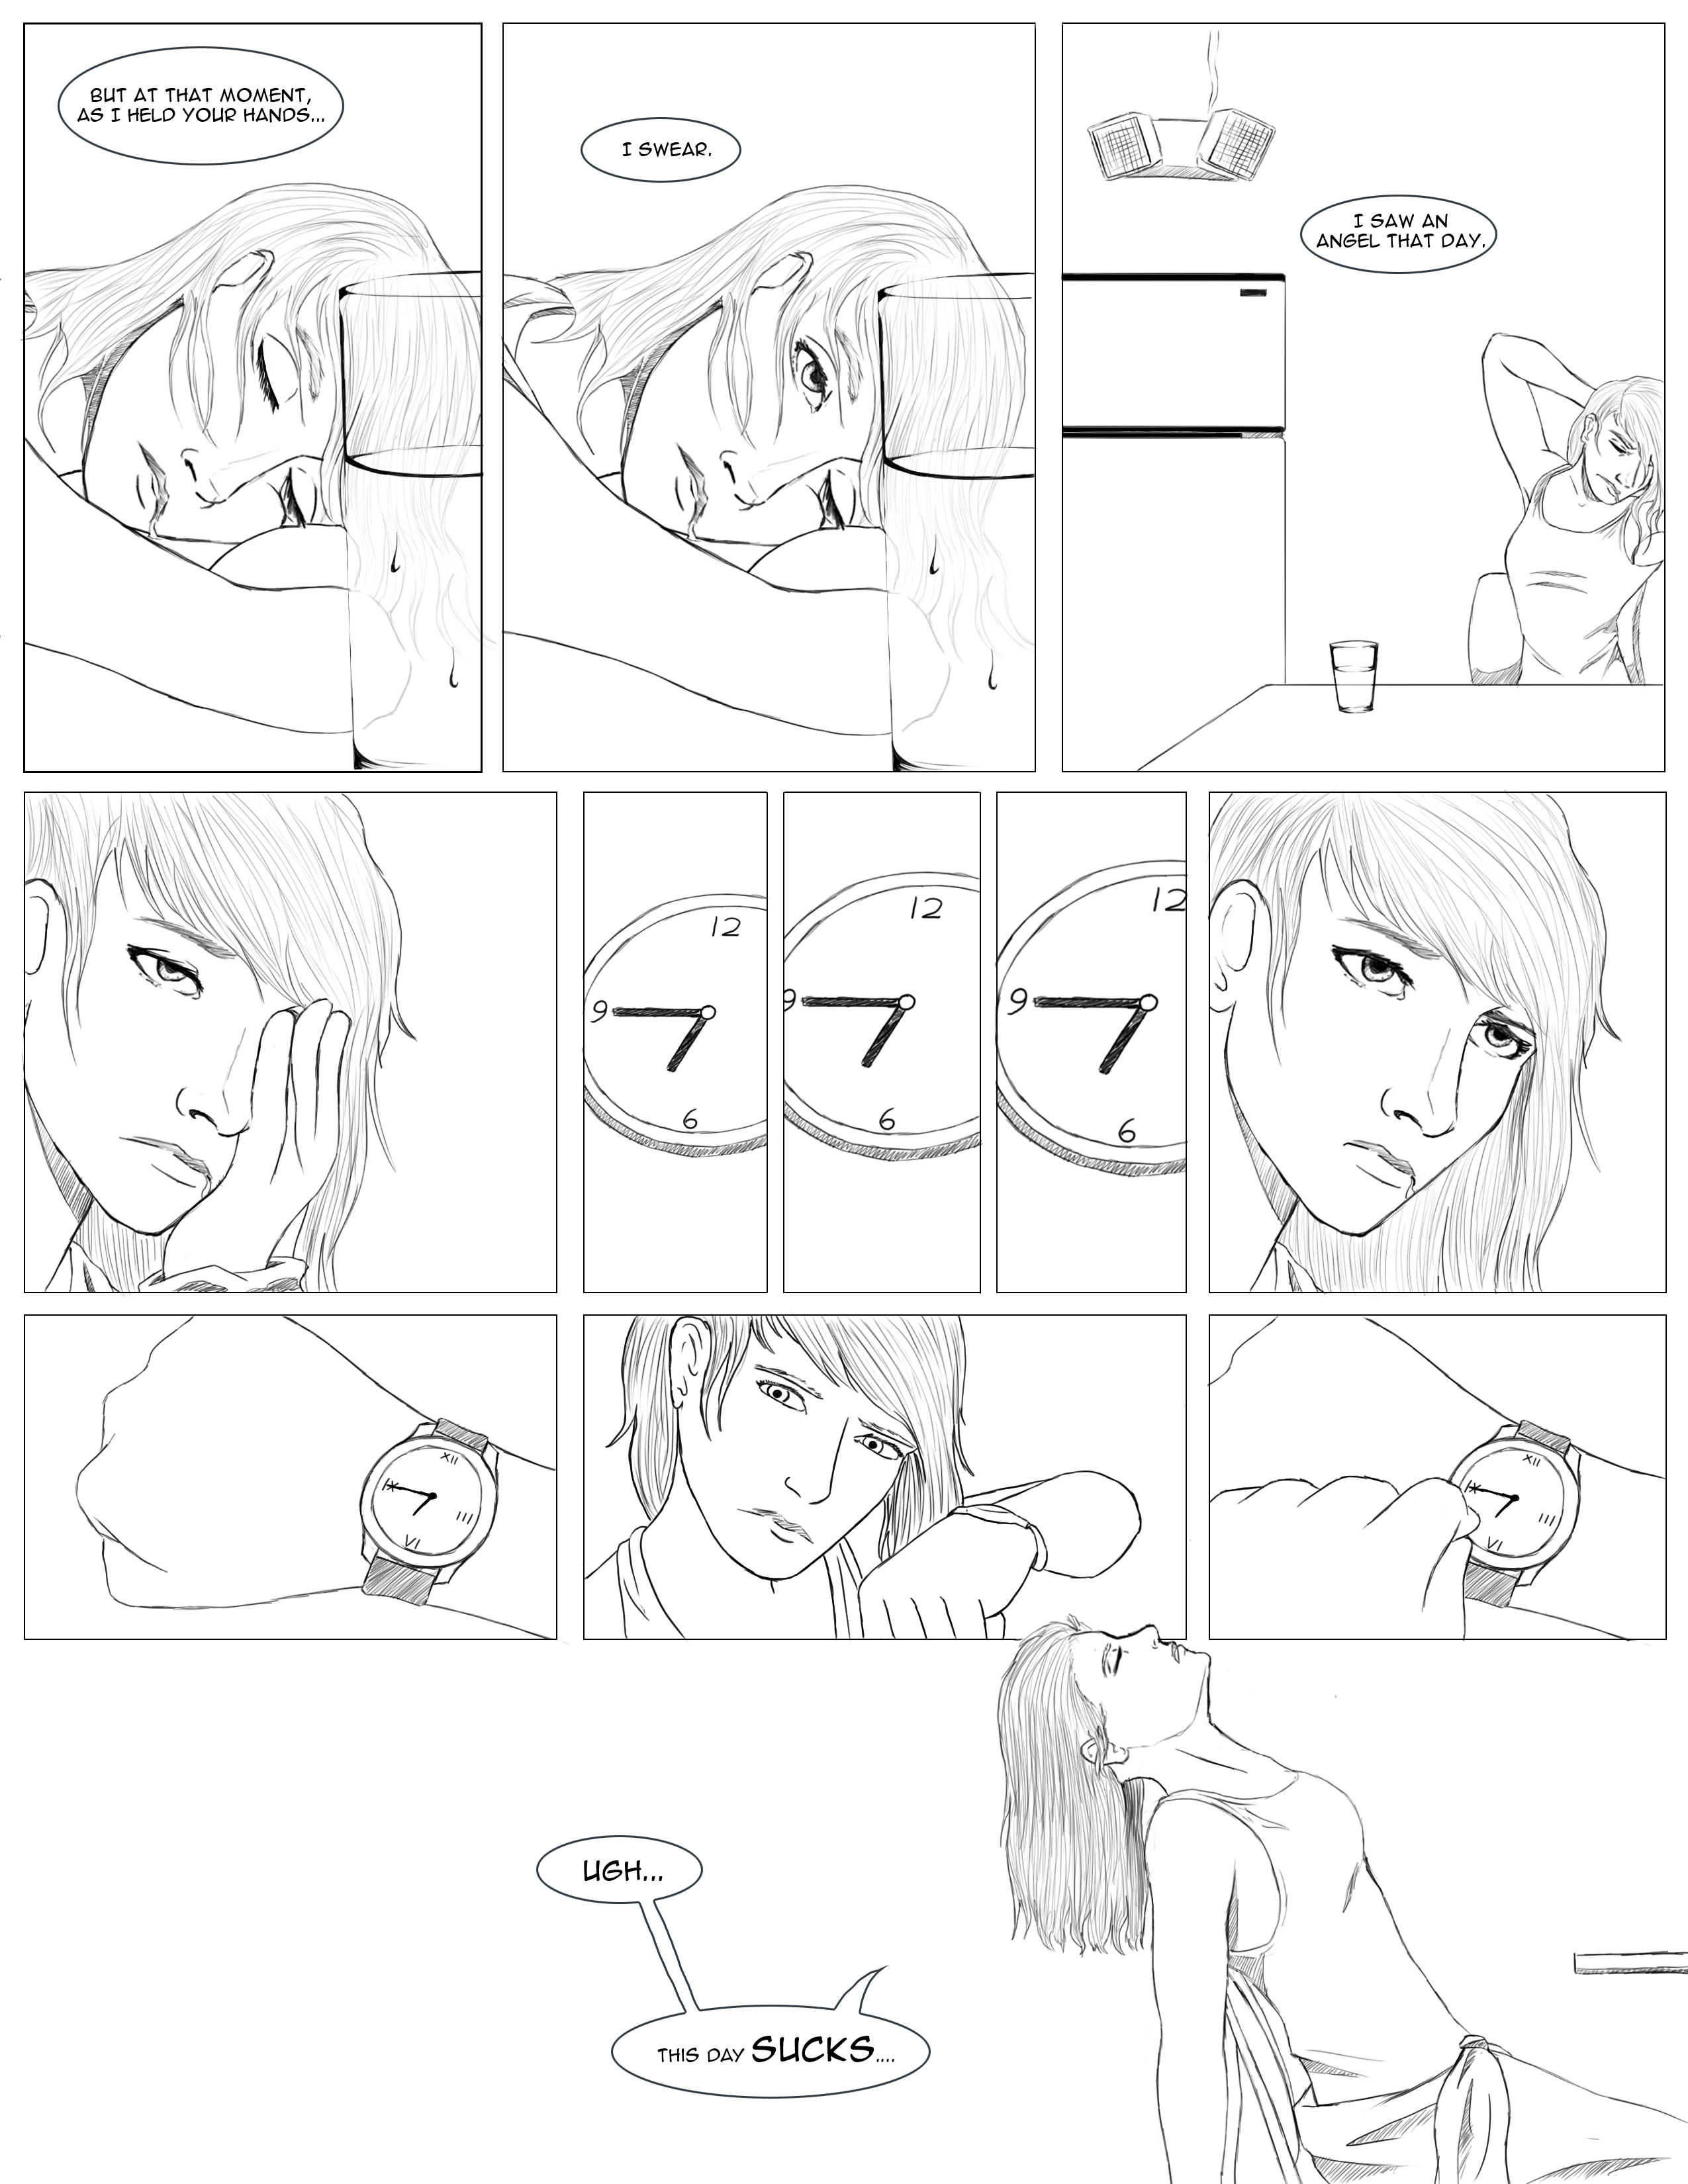 Page 2 of the Angels concept comic